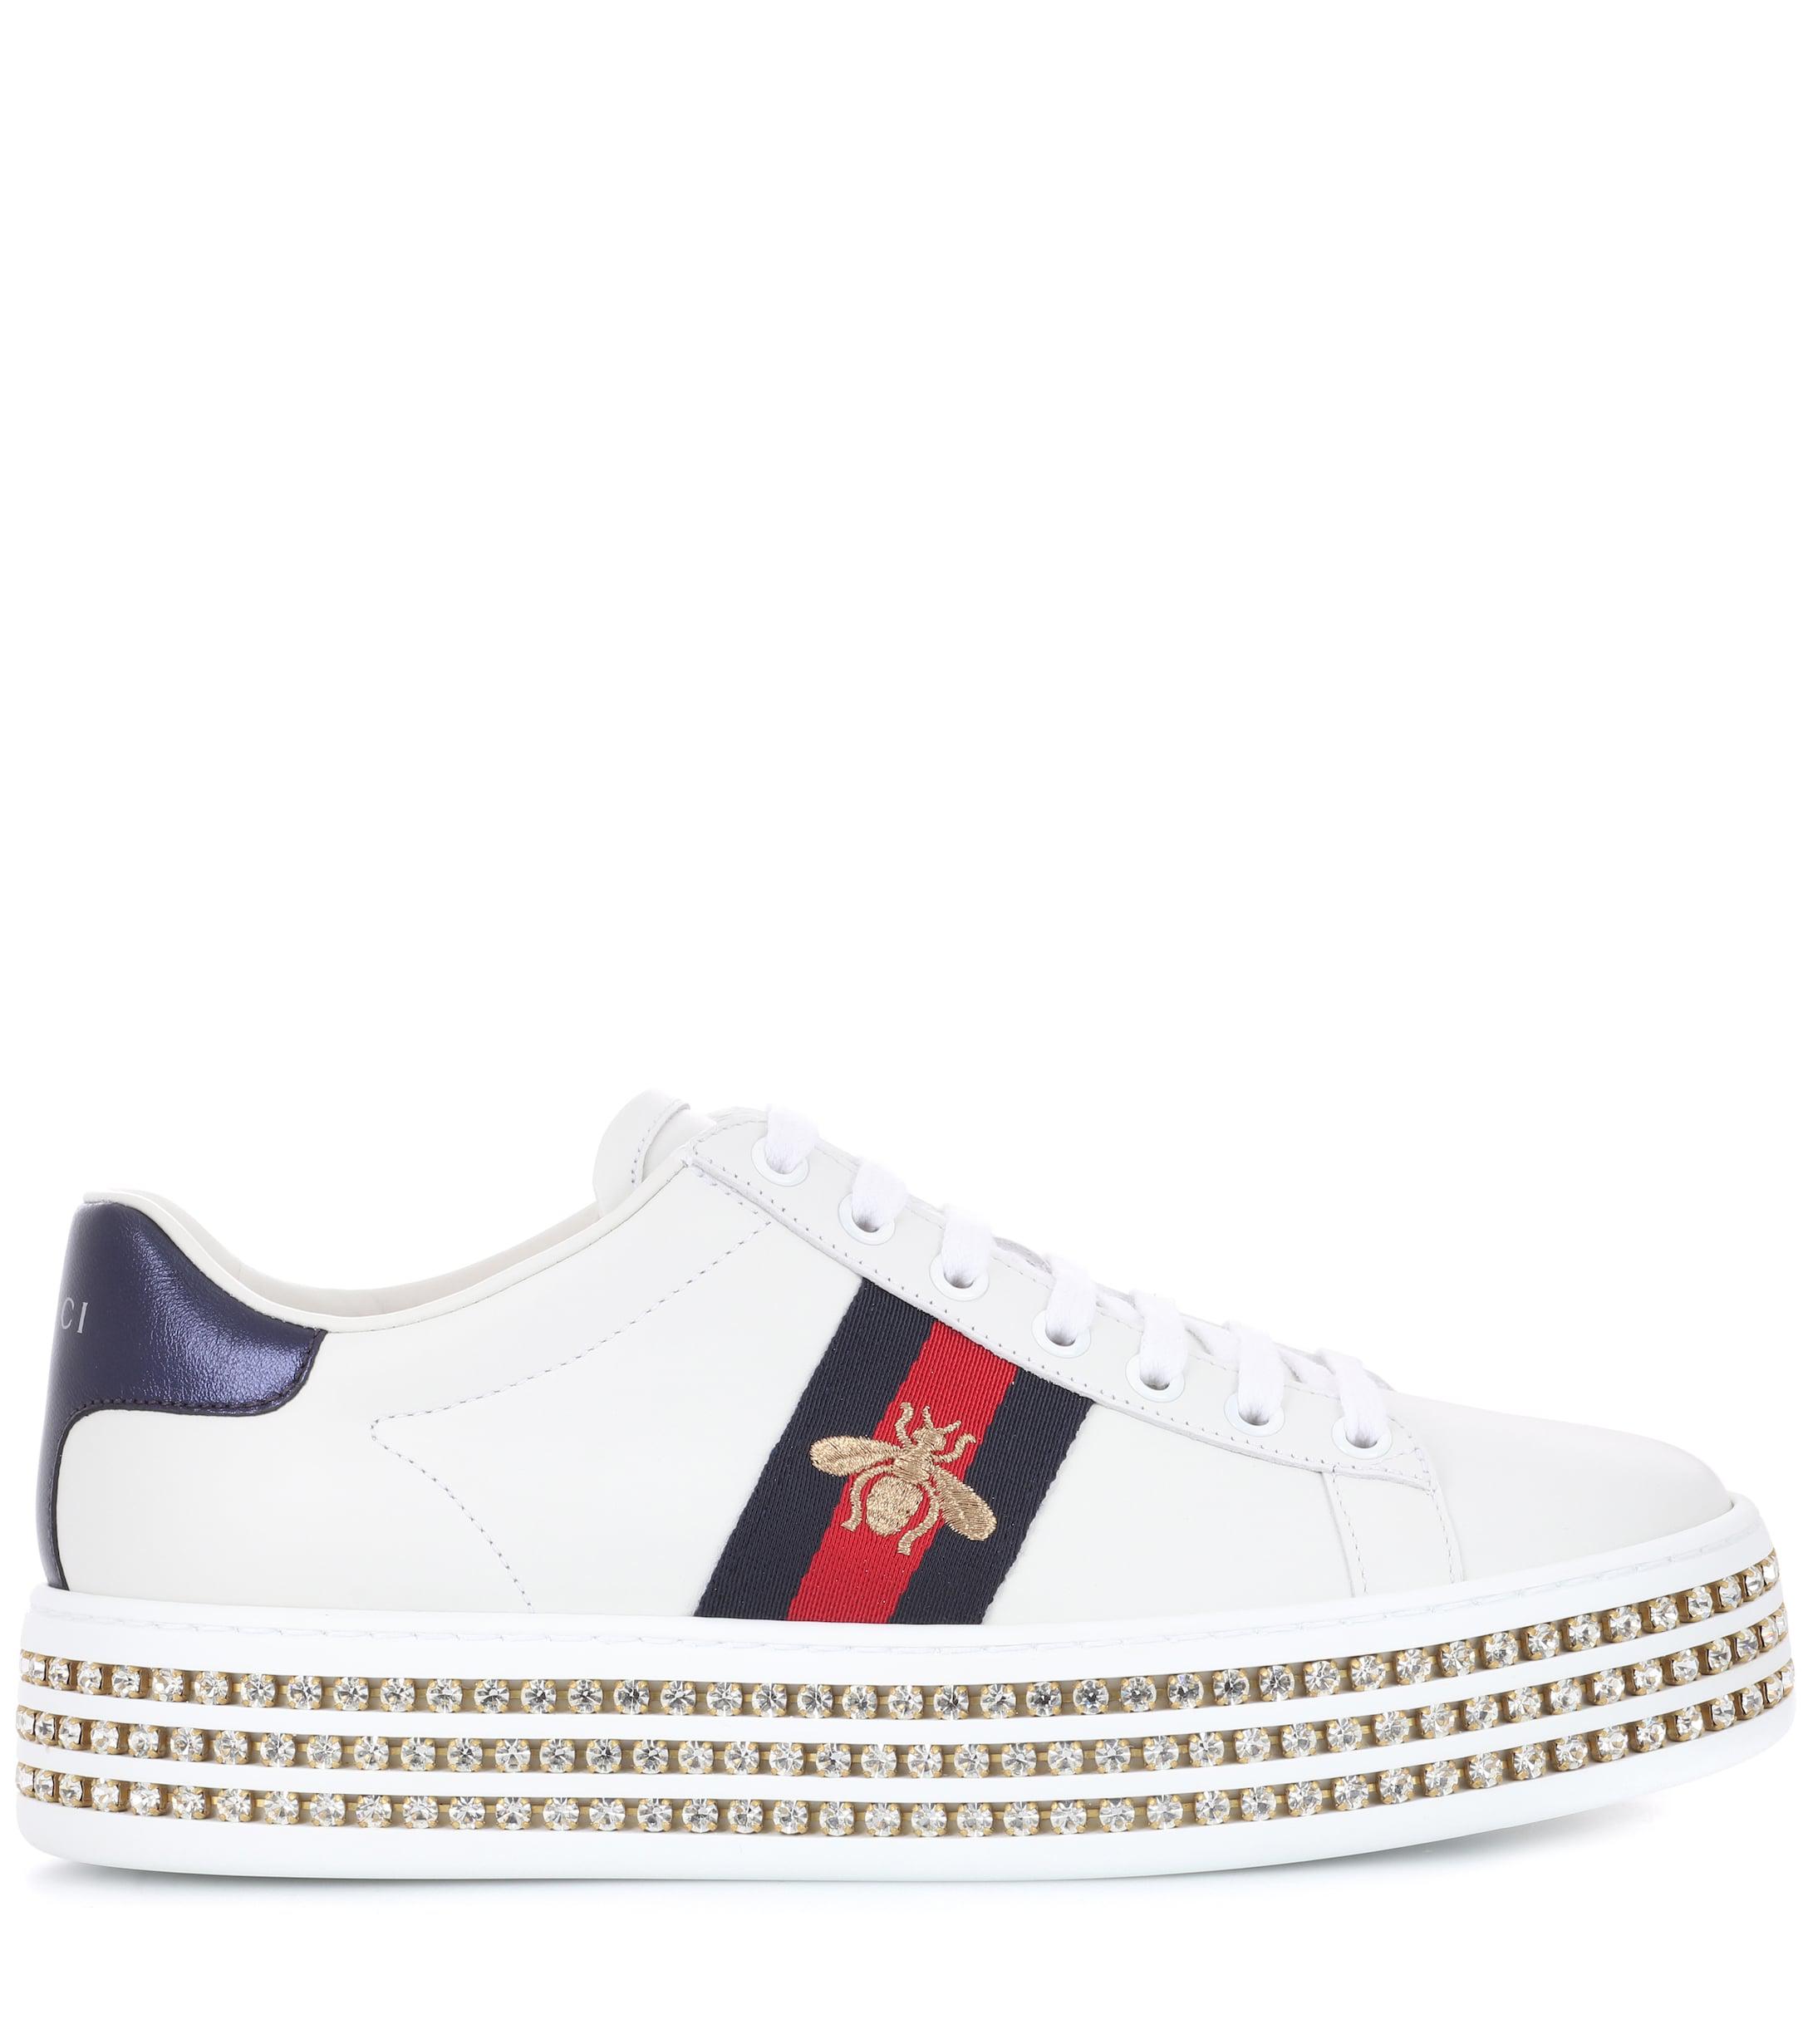 Gucci Ace Platform Leather Sneakers - Lyst